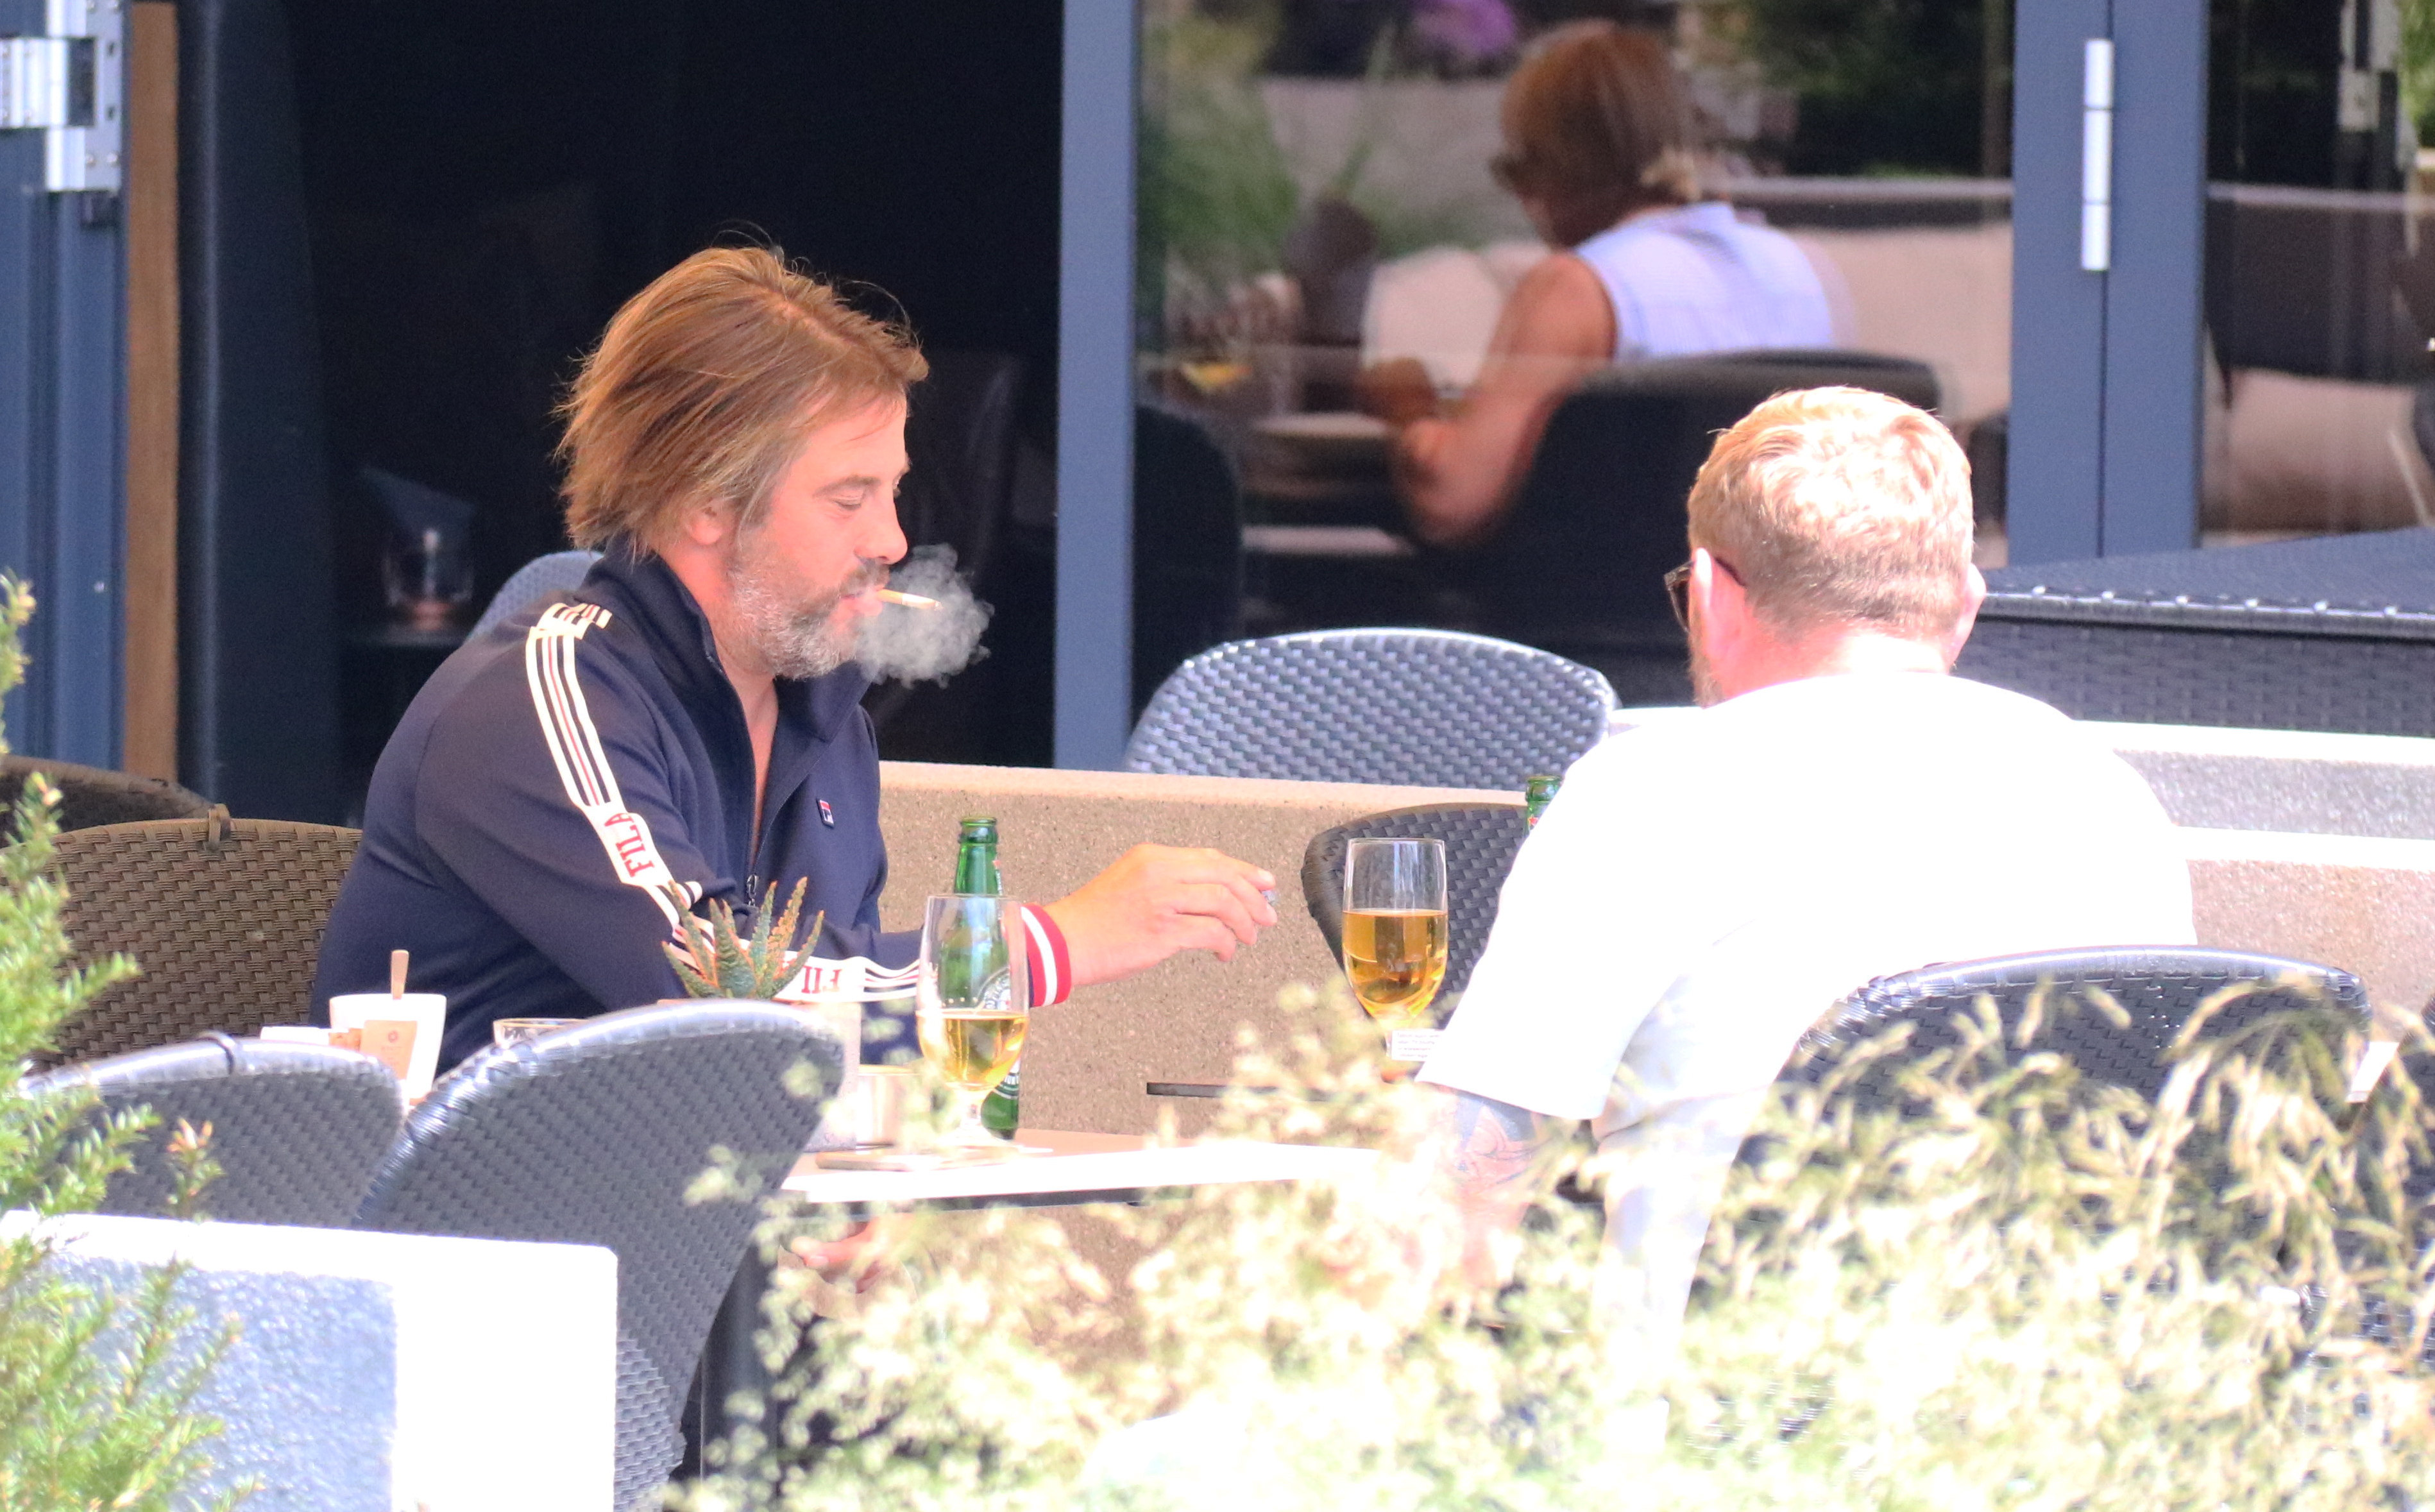 Jamiroquai enjoying a day off in Cologne